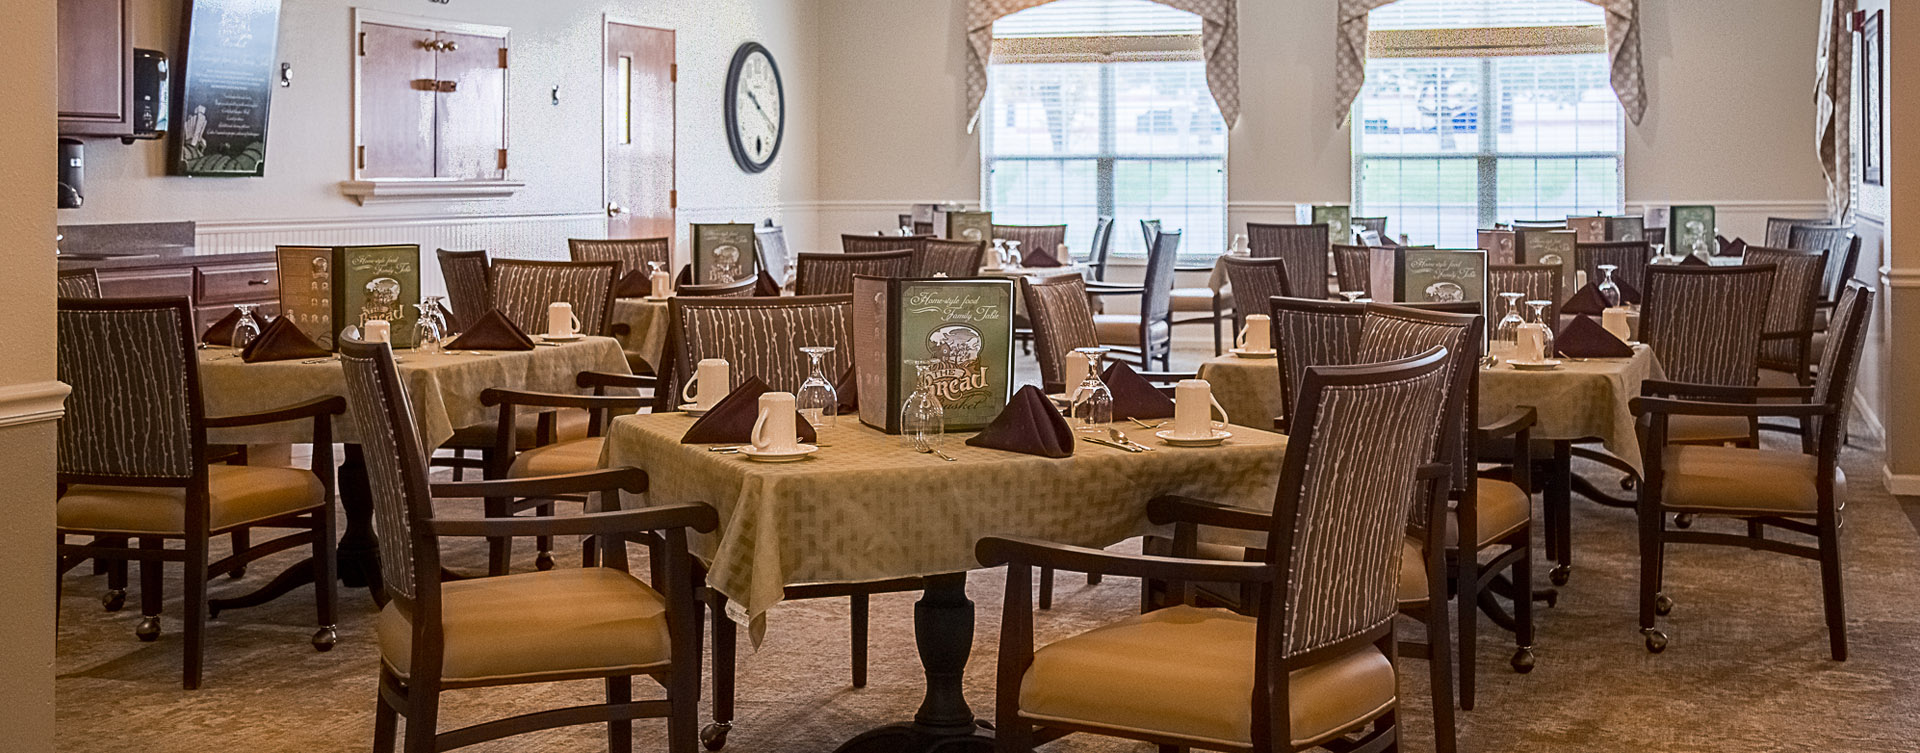 Enjoy homestyle food with made-from-scratch recipes in our dining room at Bickford of Davenport